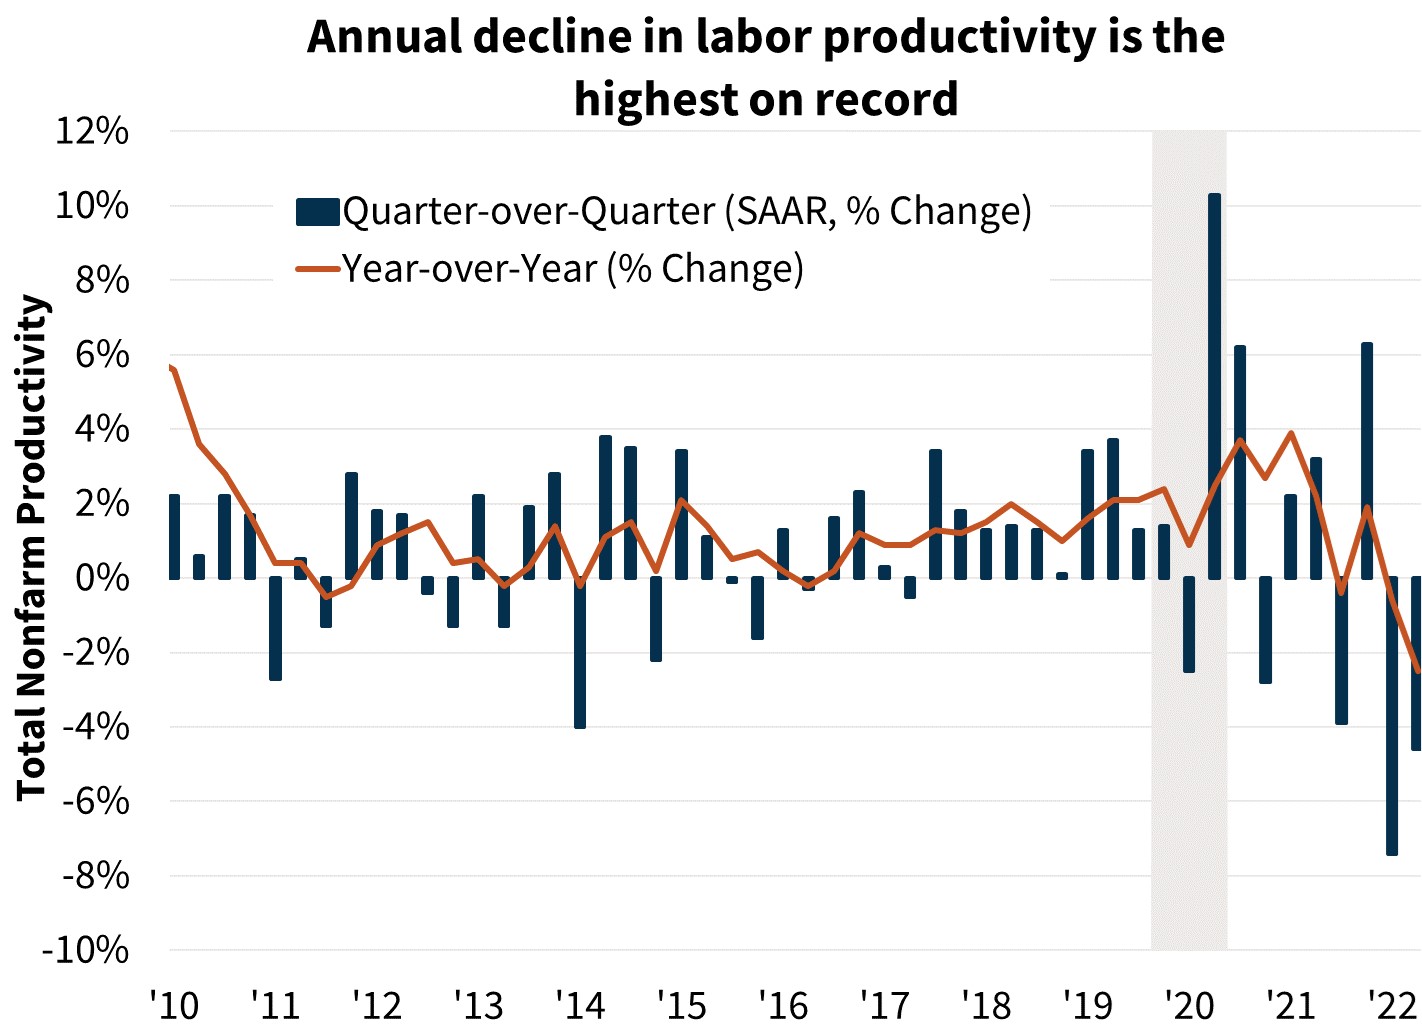  Annual decline in labor productivity is the highest on record 